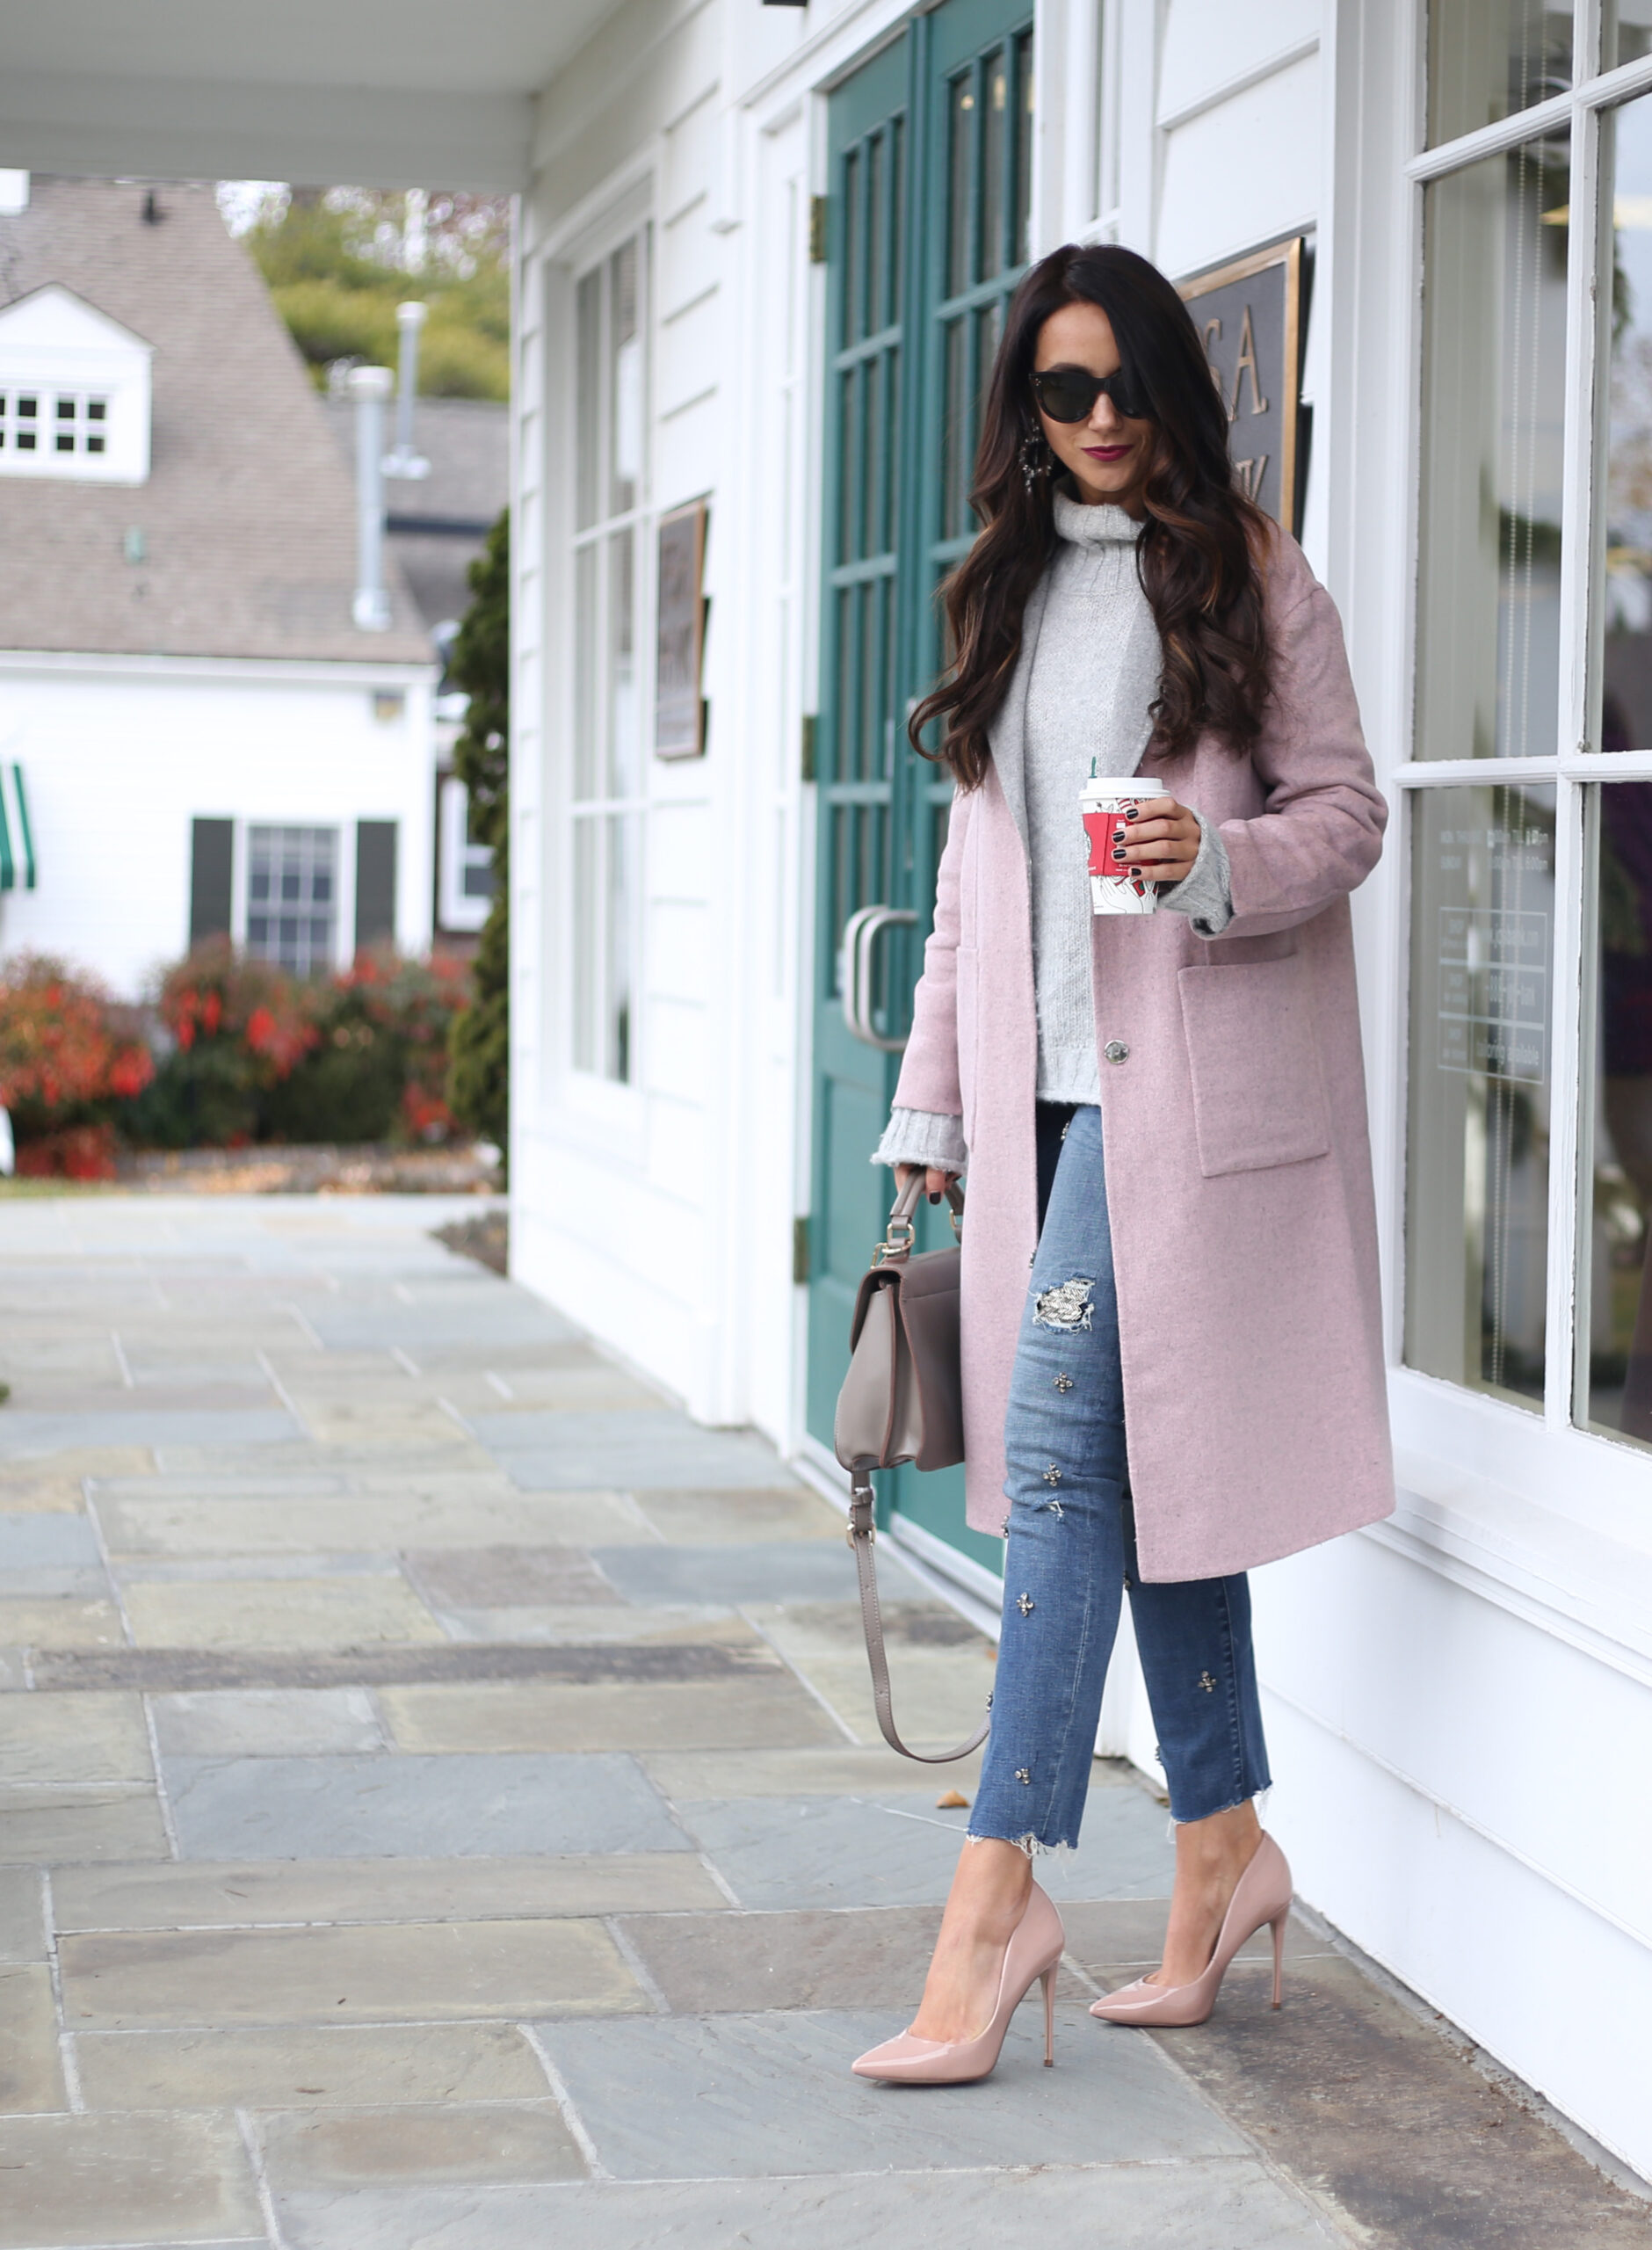 anna monteiro of blushing rose style wearing pink and grey combo in long coat and blush patent leather pumps